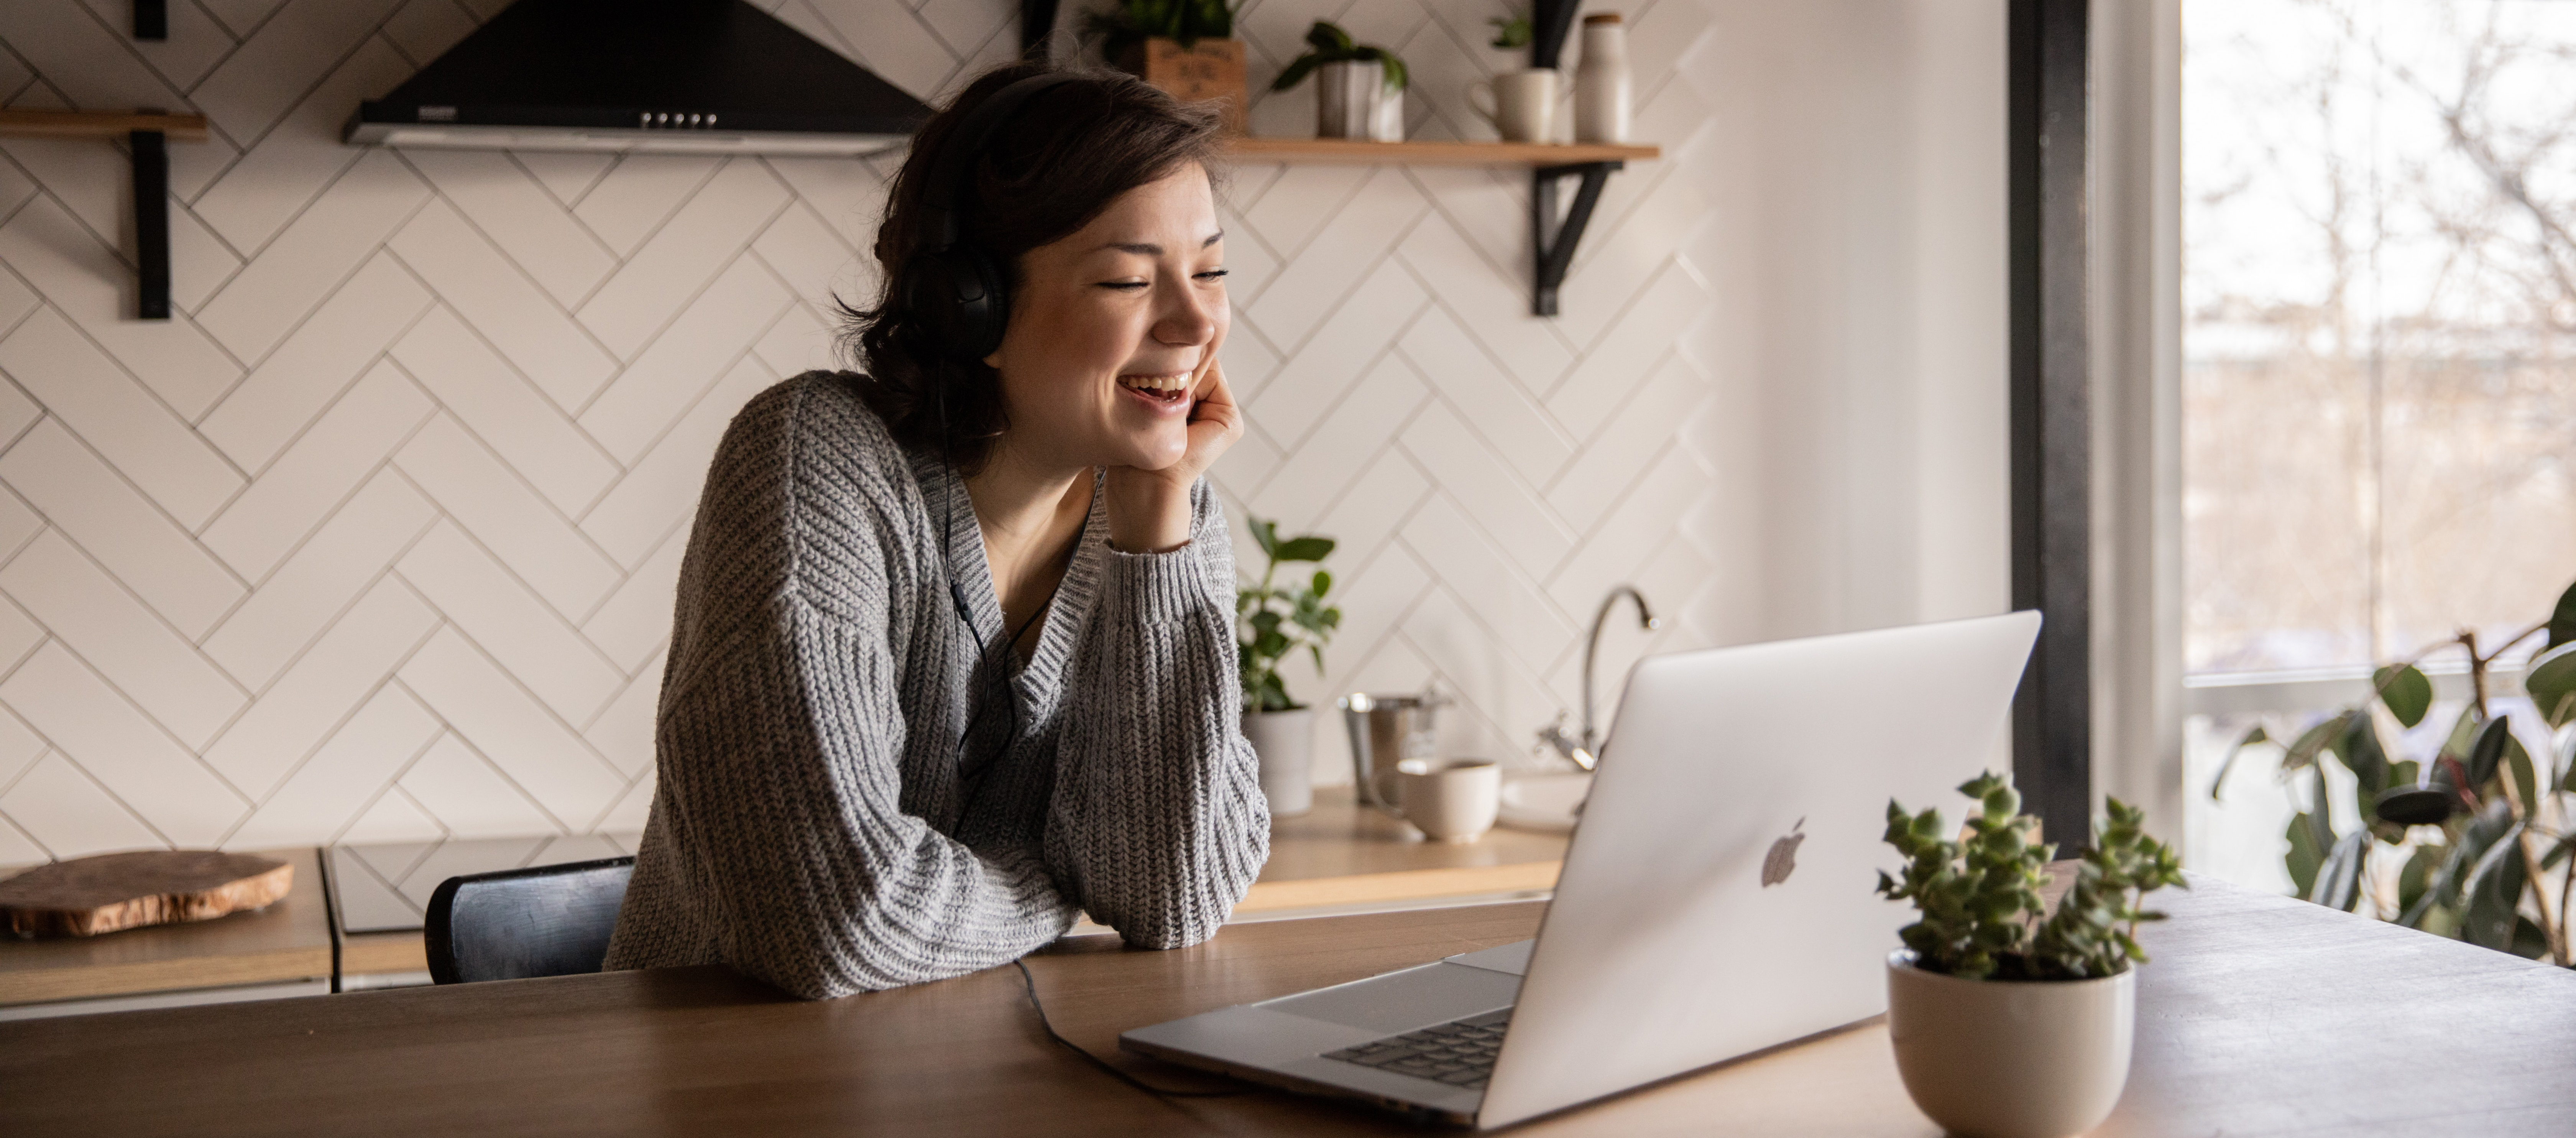 Young woman smiling at laptop